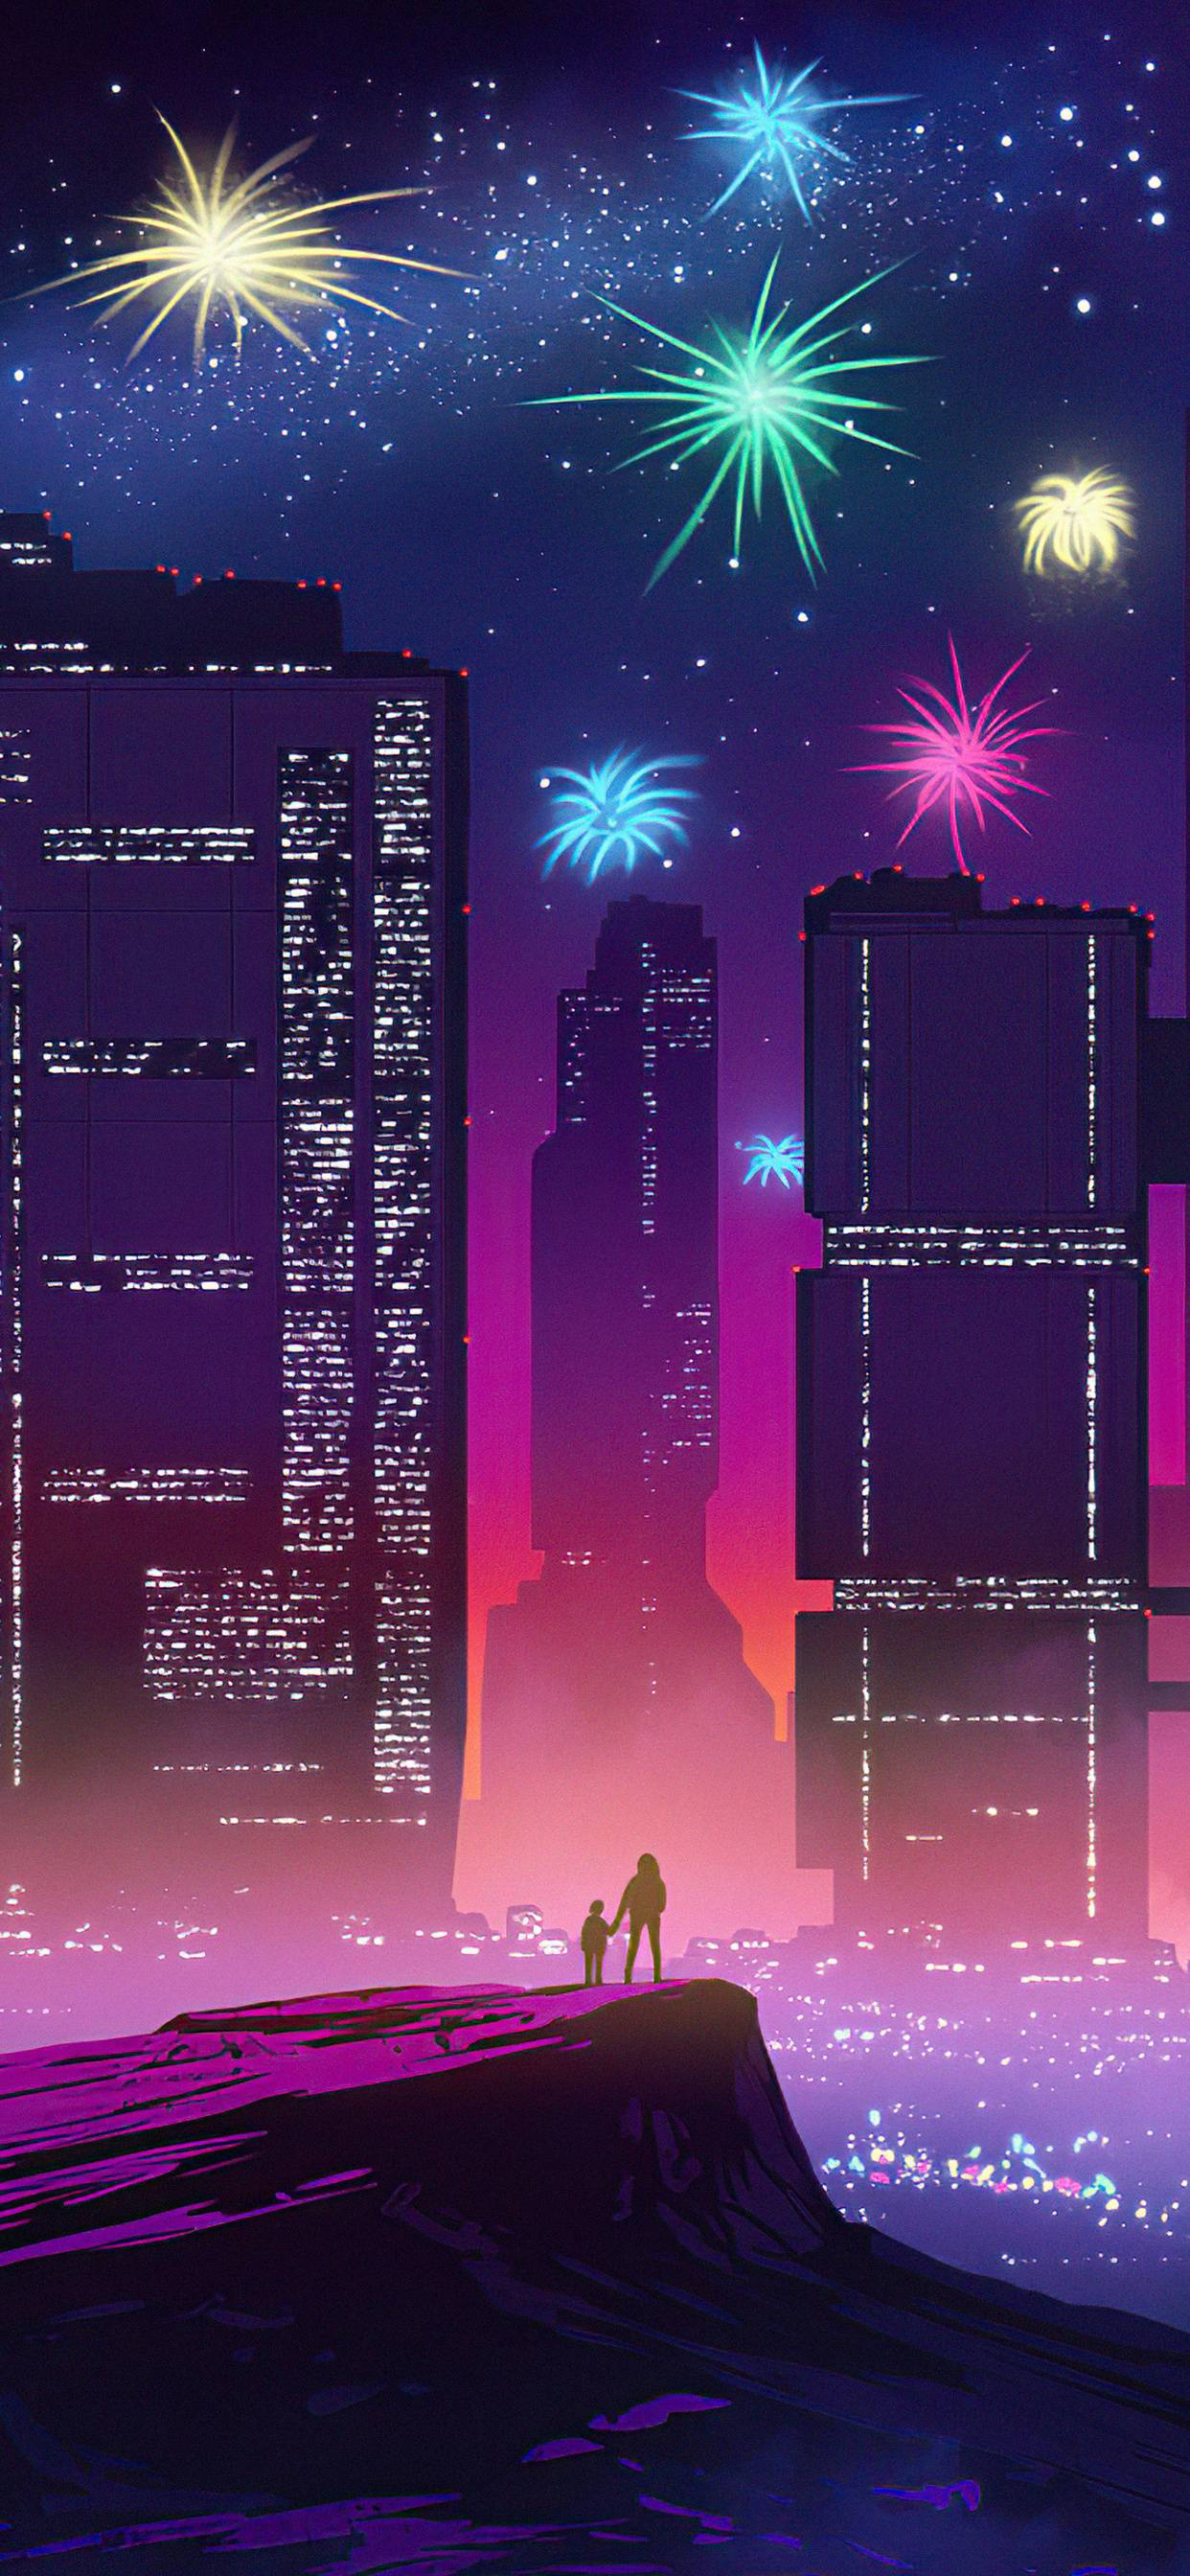 A city with fireworks in the sky - New Year